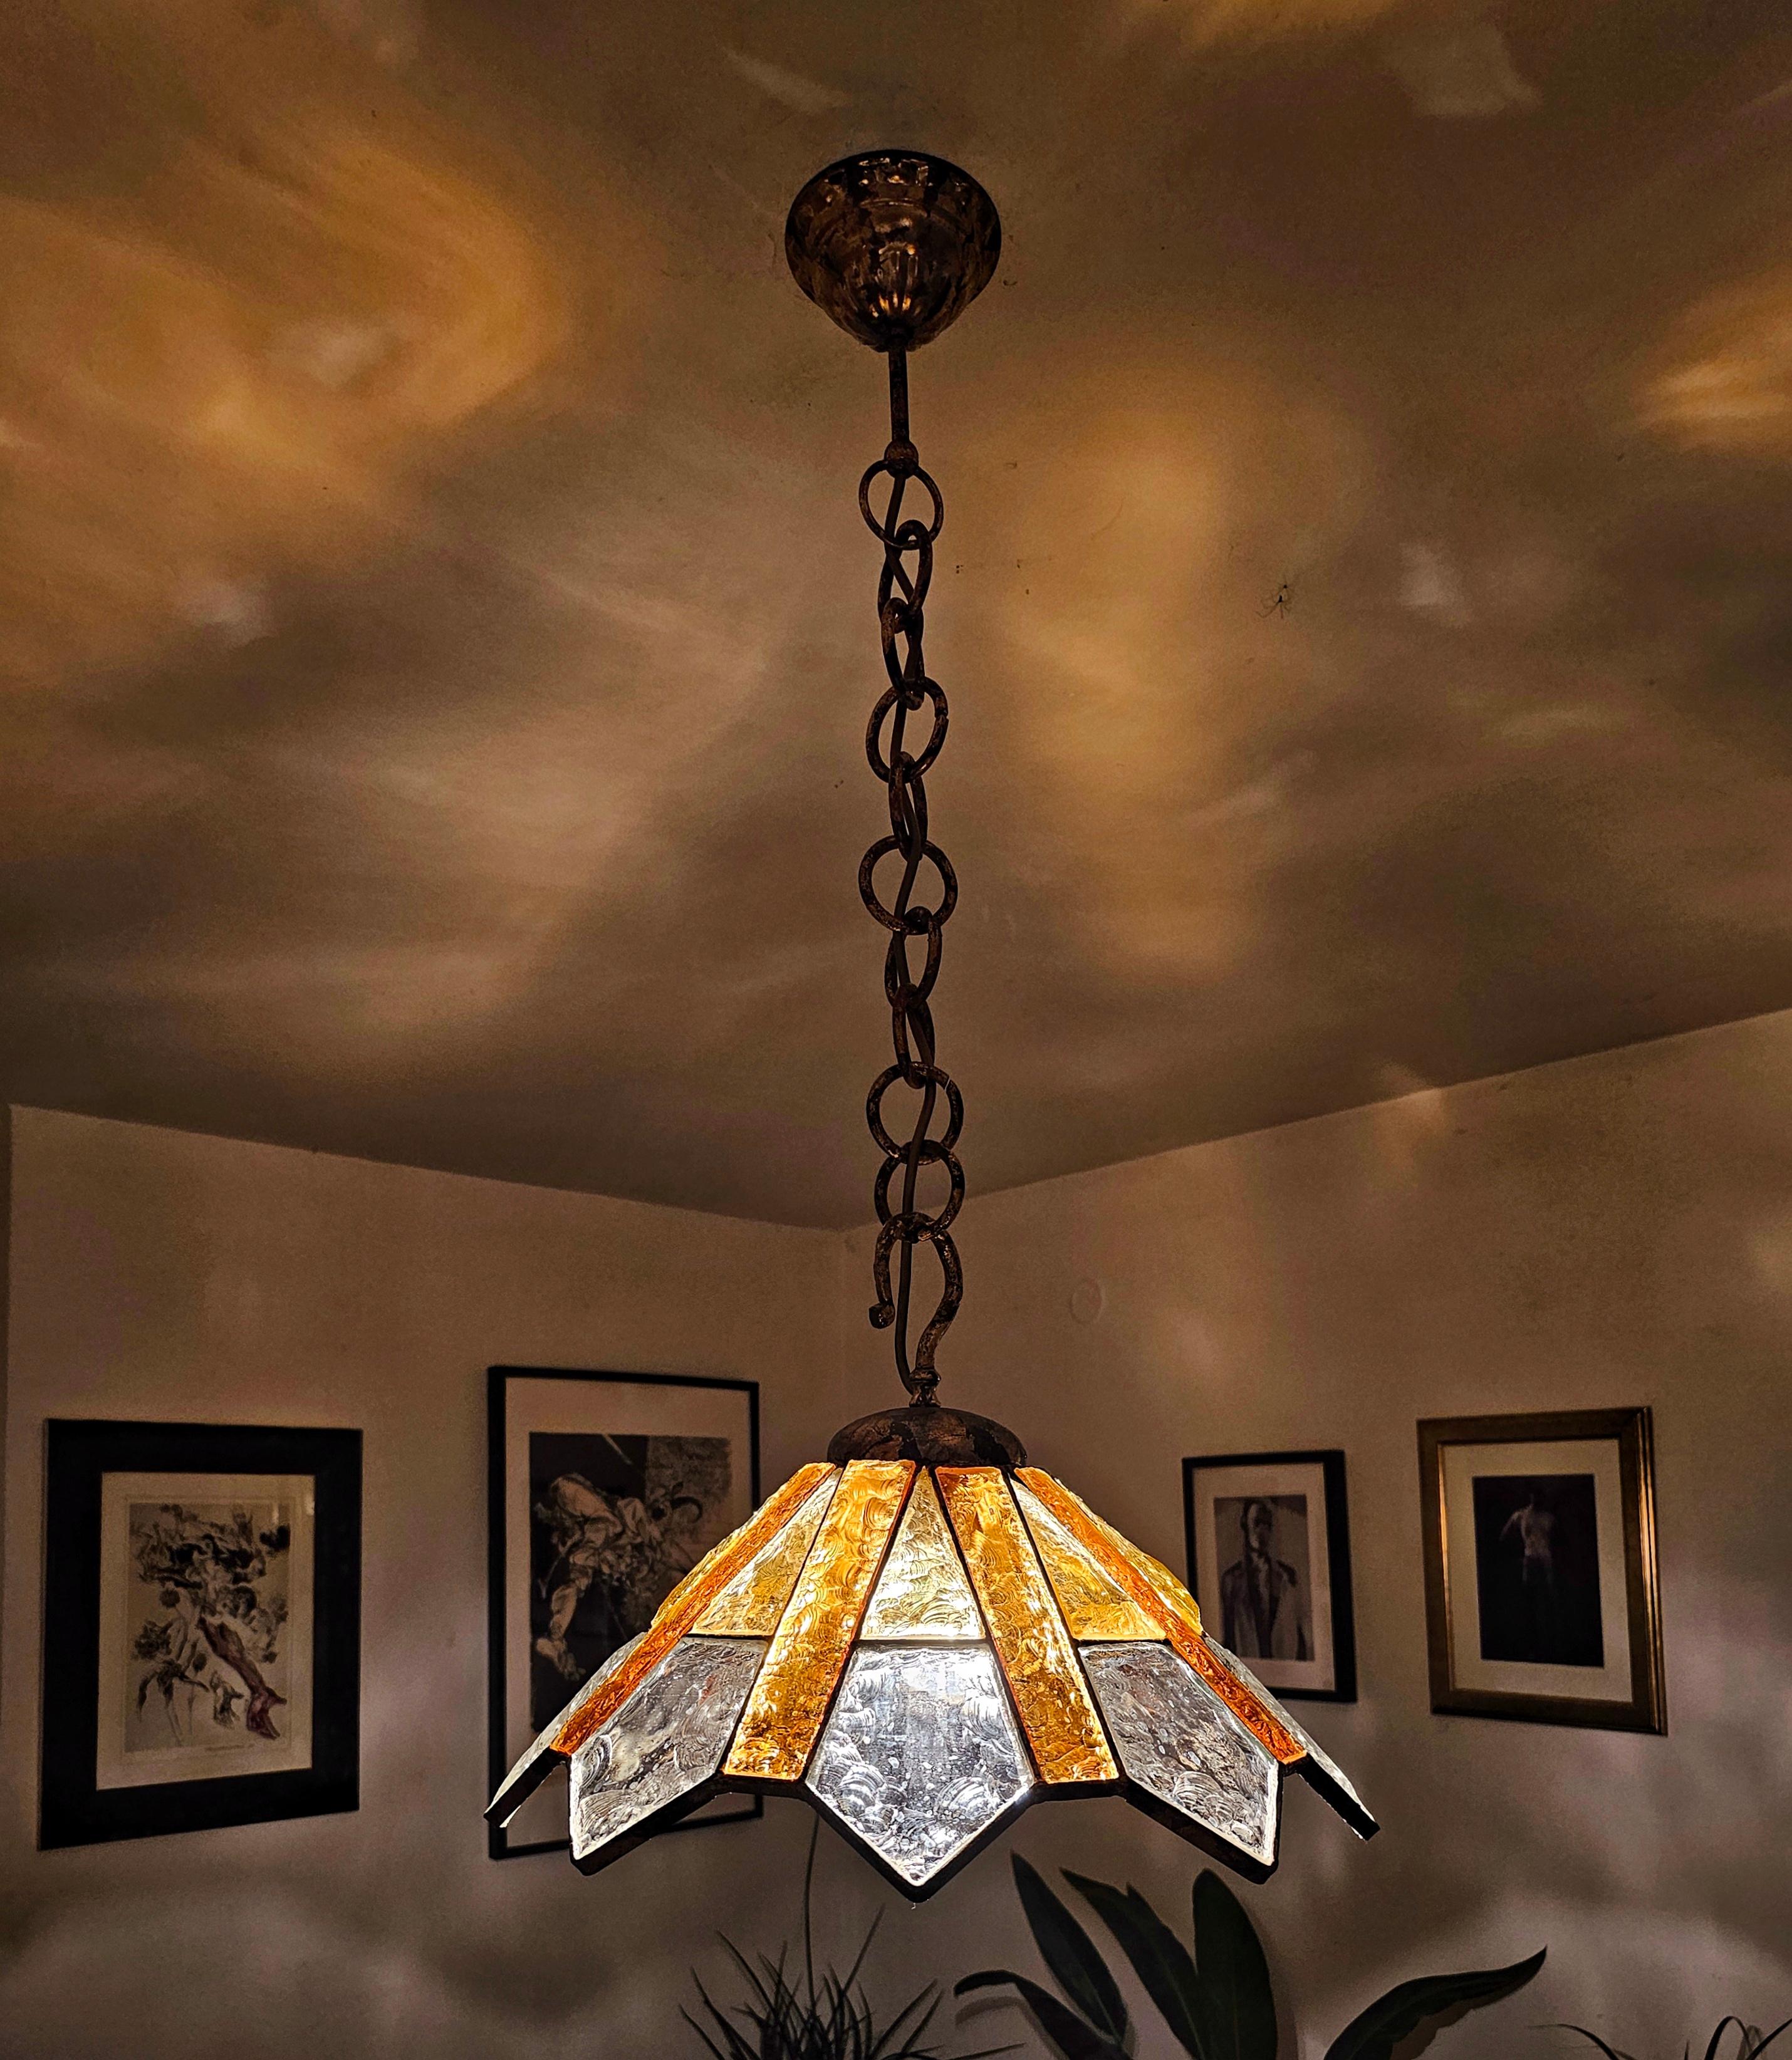 In this listing you will find an extremely rare pendant light designed by Longobard. It is done in hammered amber and clear glass, placed into gold plated wrought iron fixture. Made in Italy in 1970s.

Very good vintage condition with barely any